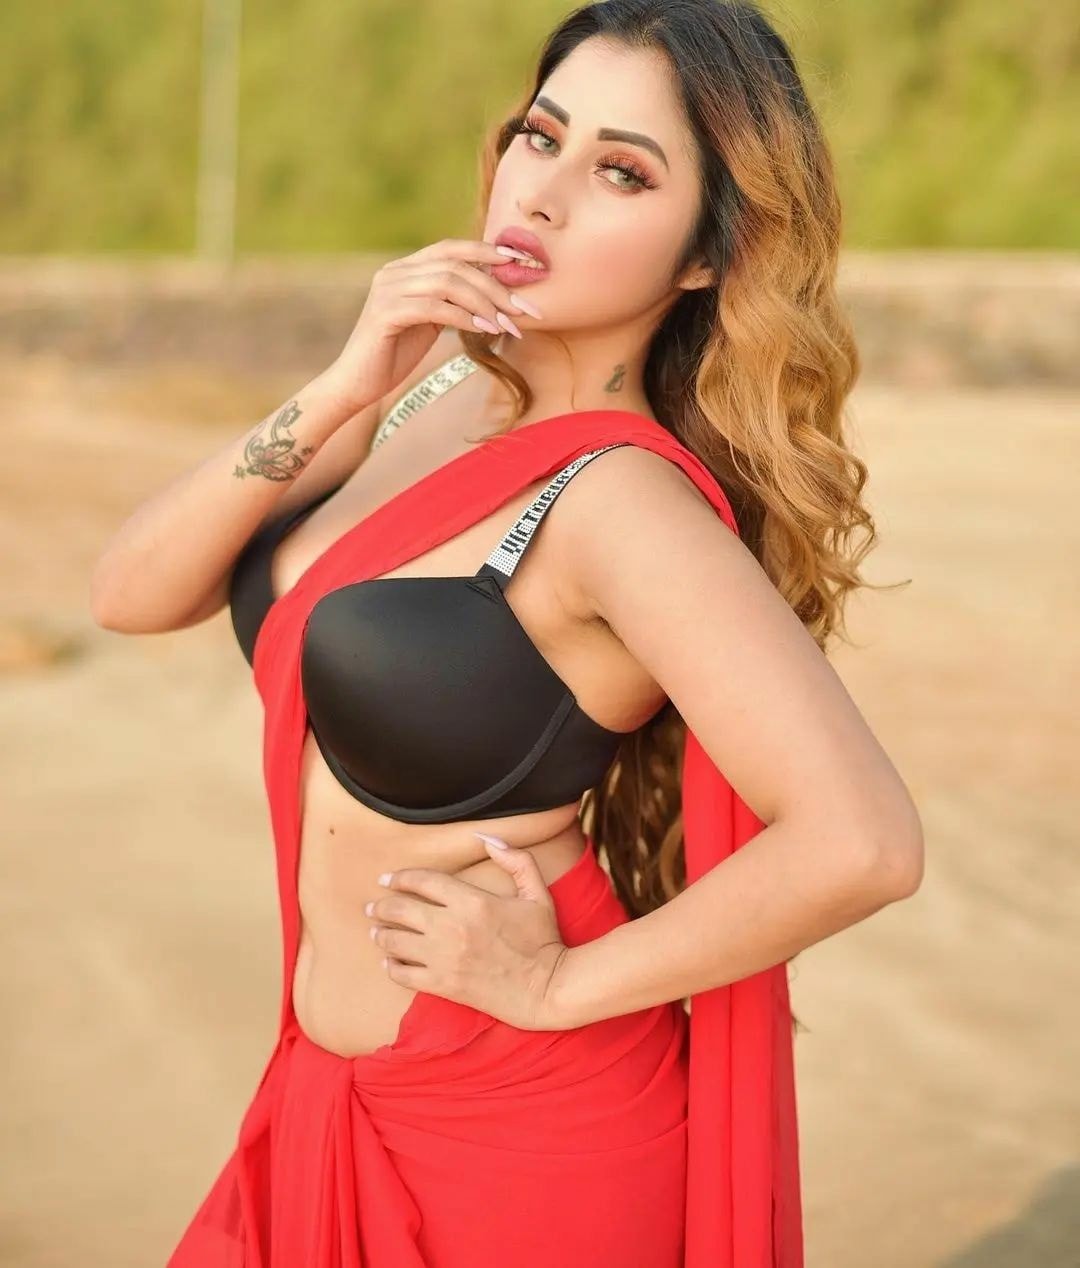 Call Girls in Lahore	+923011114937